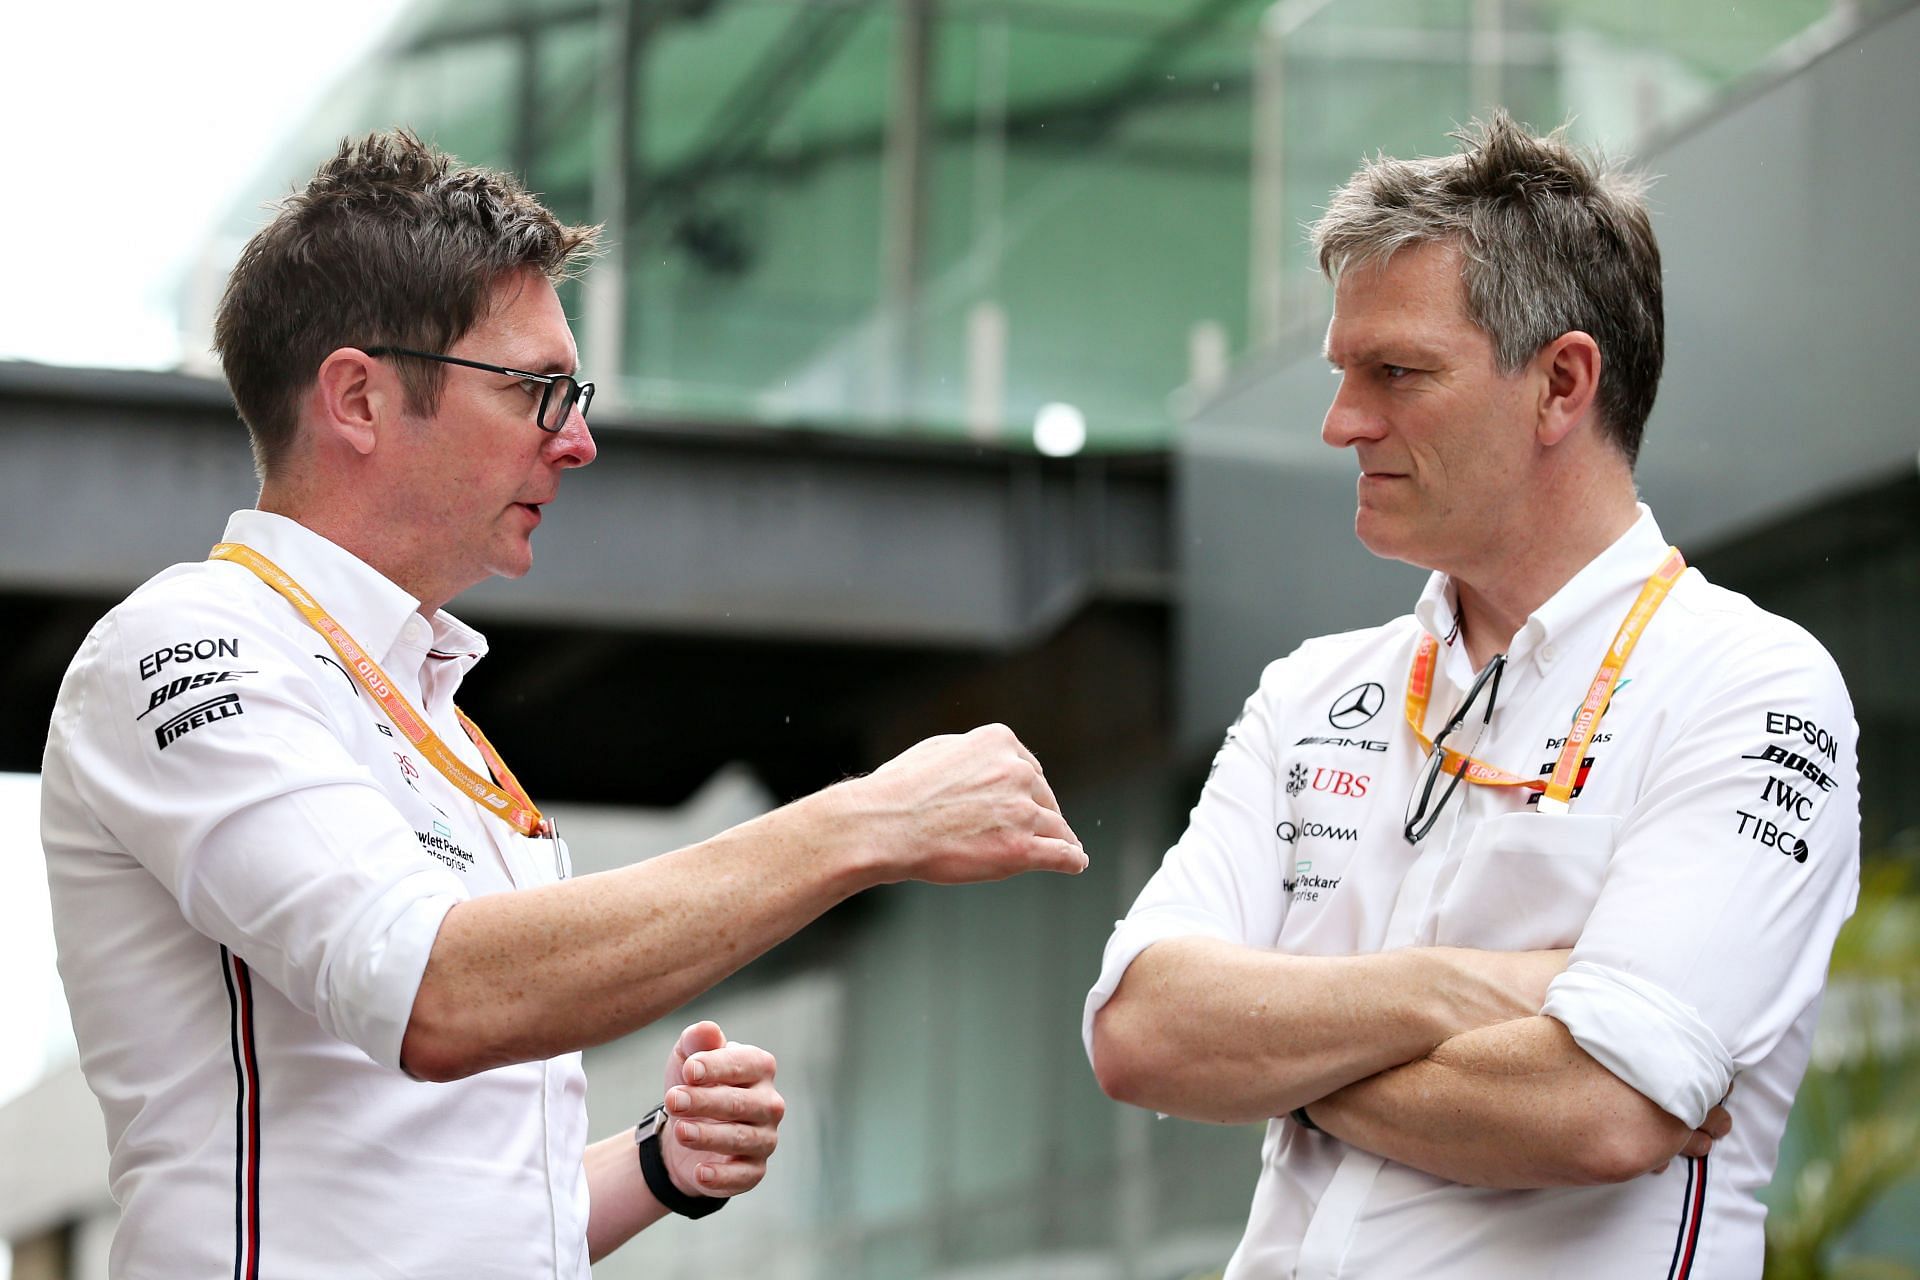 Mercedes GP Engineer Andrew Shovlin (L) talks with James Allison (R), Technical Director at Mercedes GP ahead of the F1 Grand Prix of Brazil